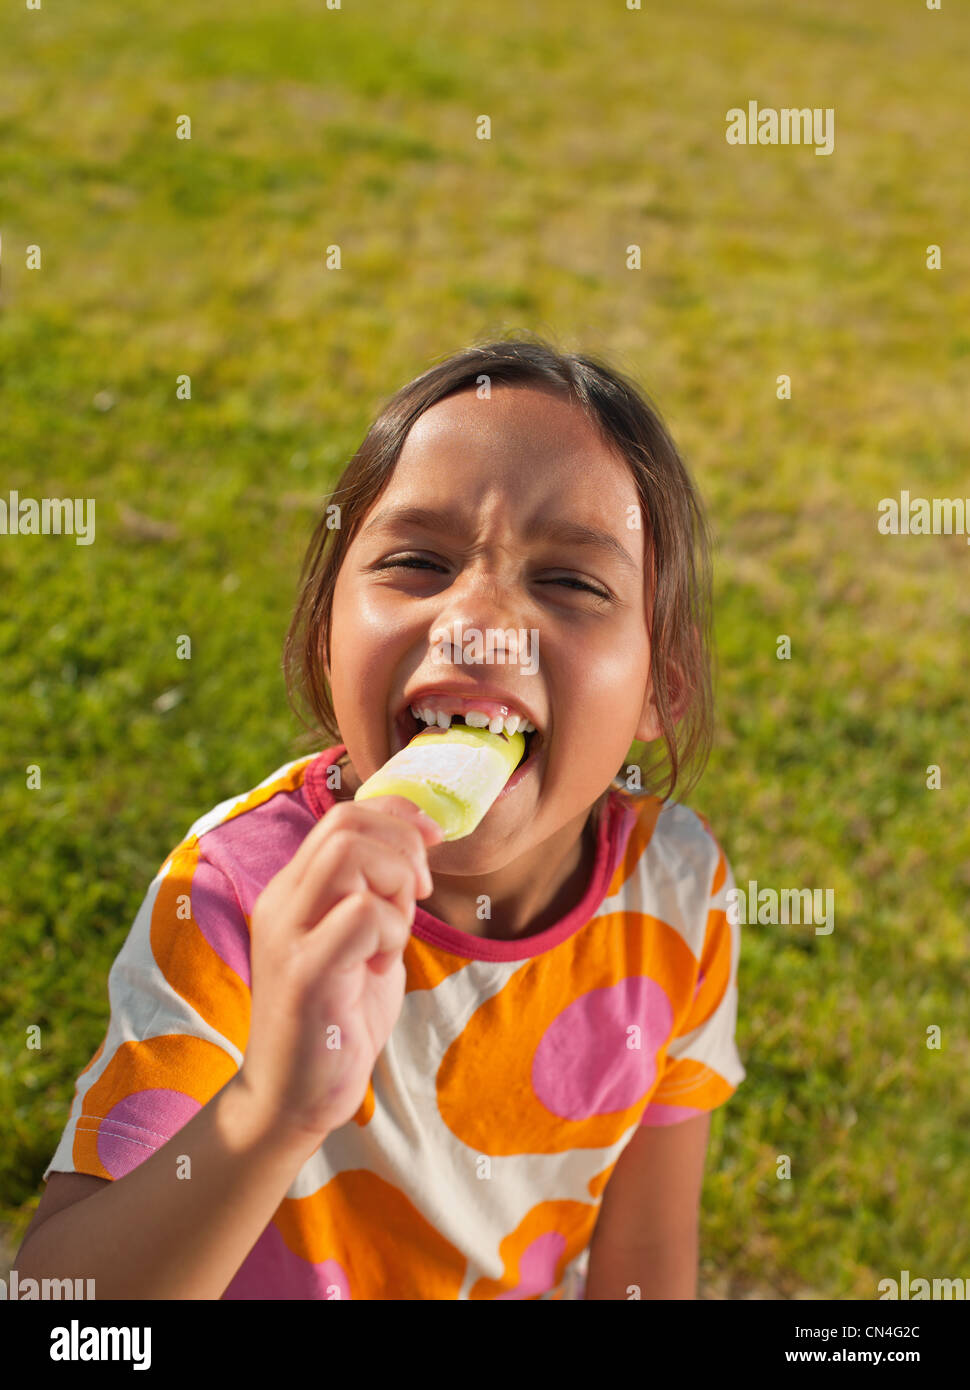 Girl biting into ice lolly, portrait Stock Photo